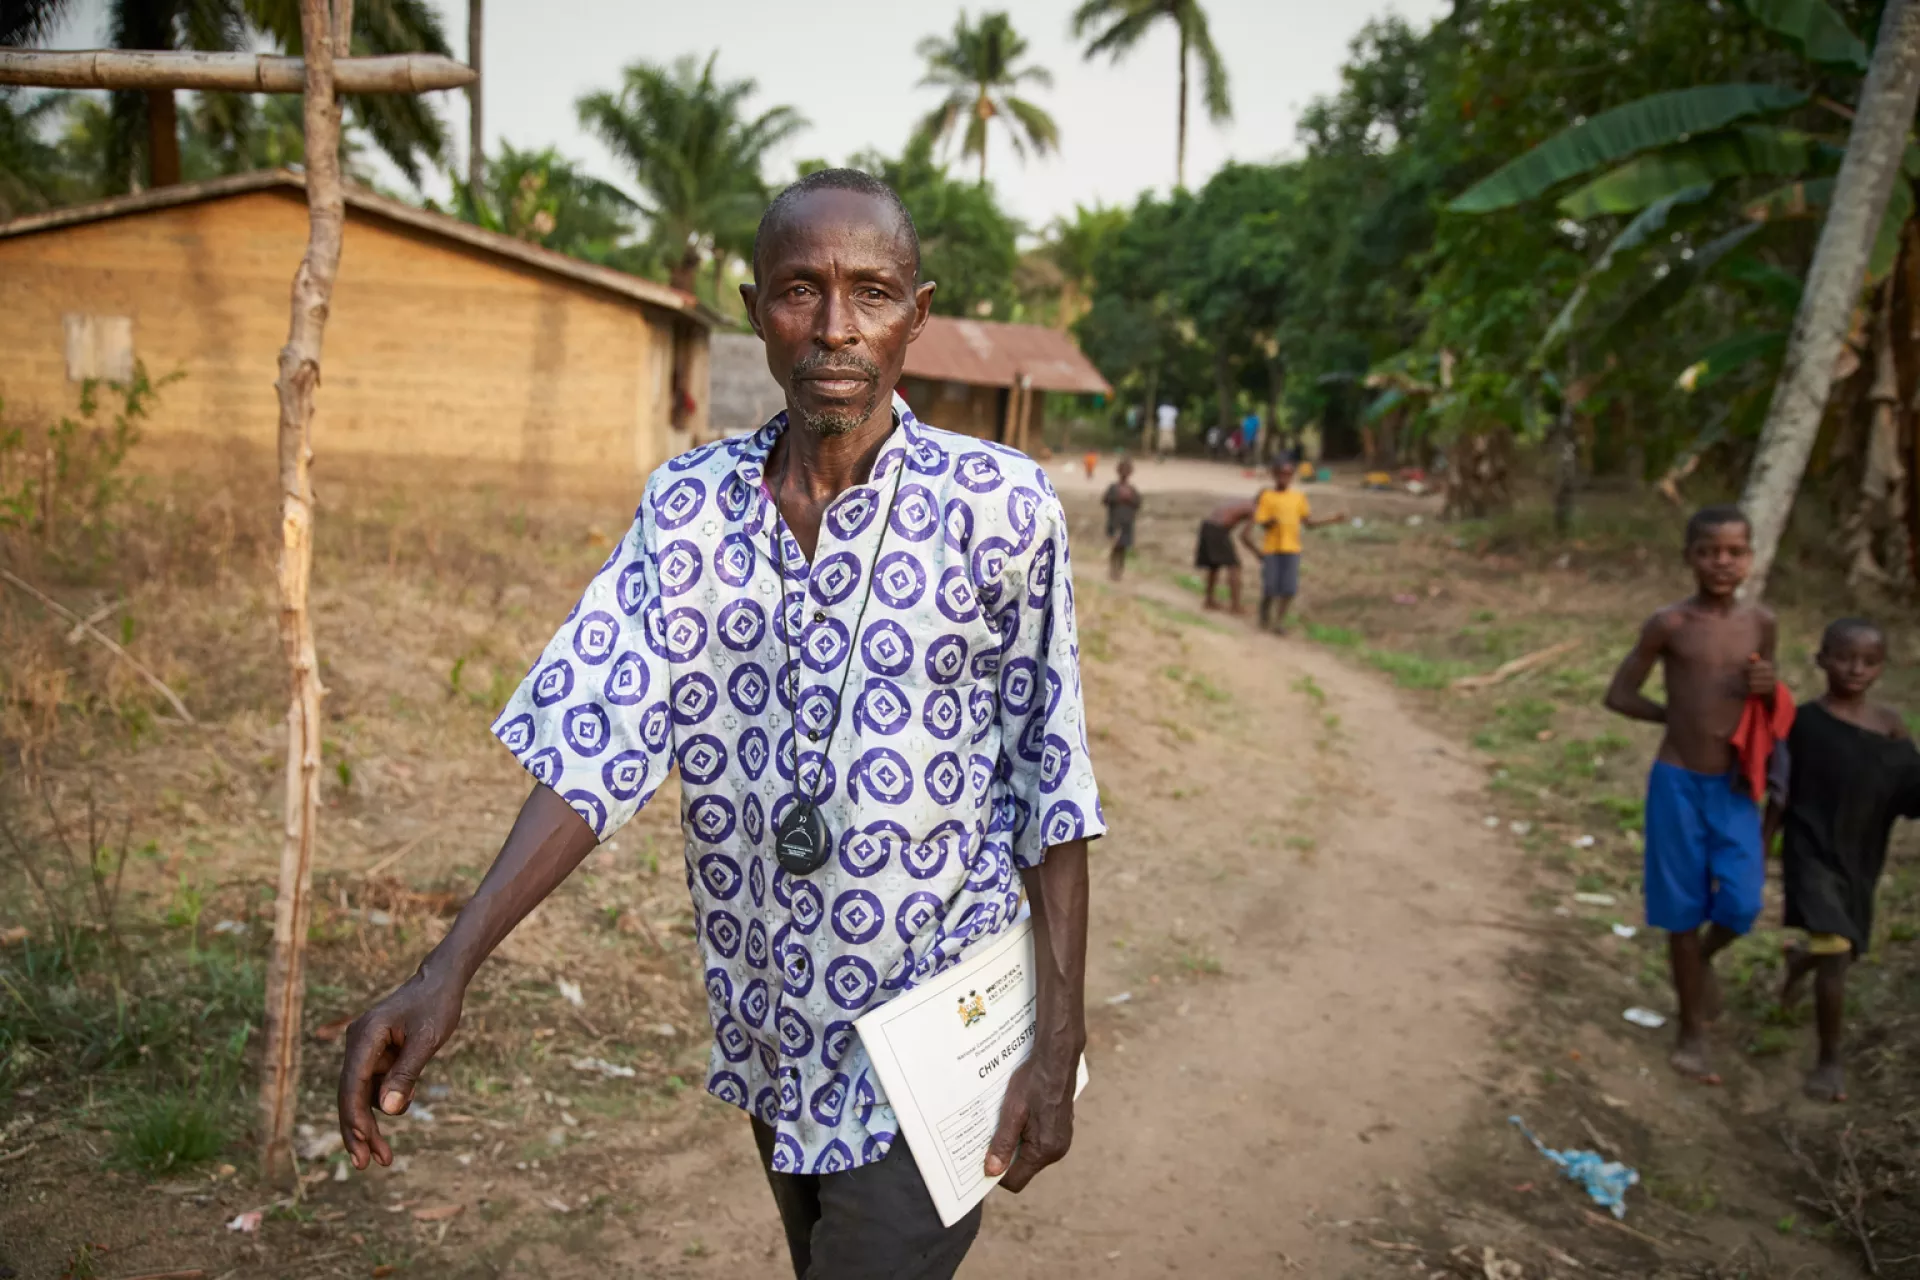 Community Health Worker (CHW) Brima Bangura, carrying health papers, walks through Maforay Village in Safroko Limba Chiefdom, Bombali District. Two boys are visible behind him. Mr. Bangura became a CHW in 2012 to help bring basic maternal and child health services closer to his village.